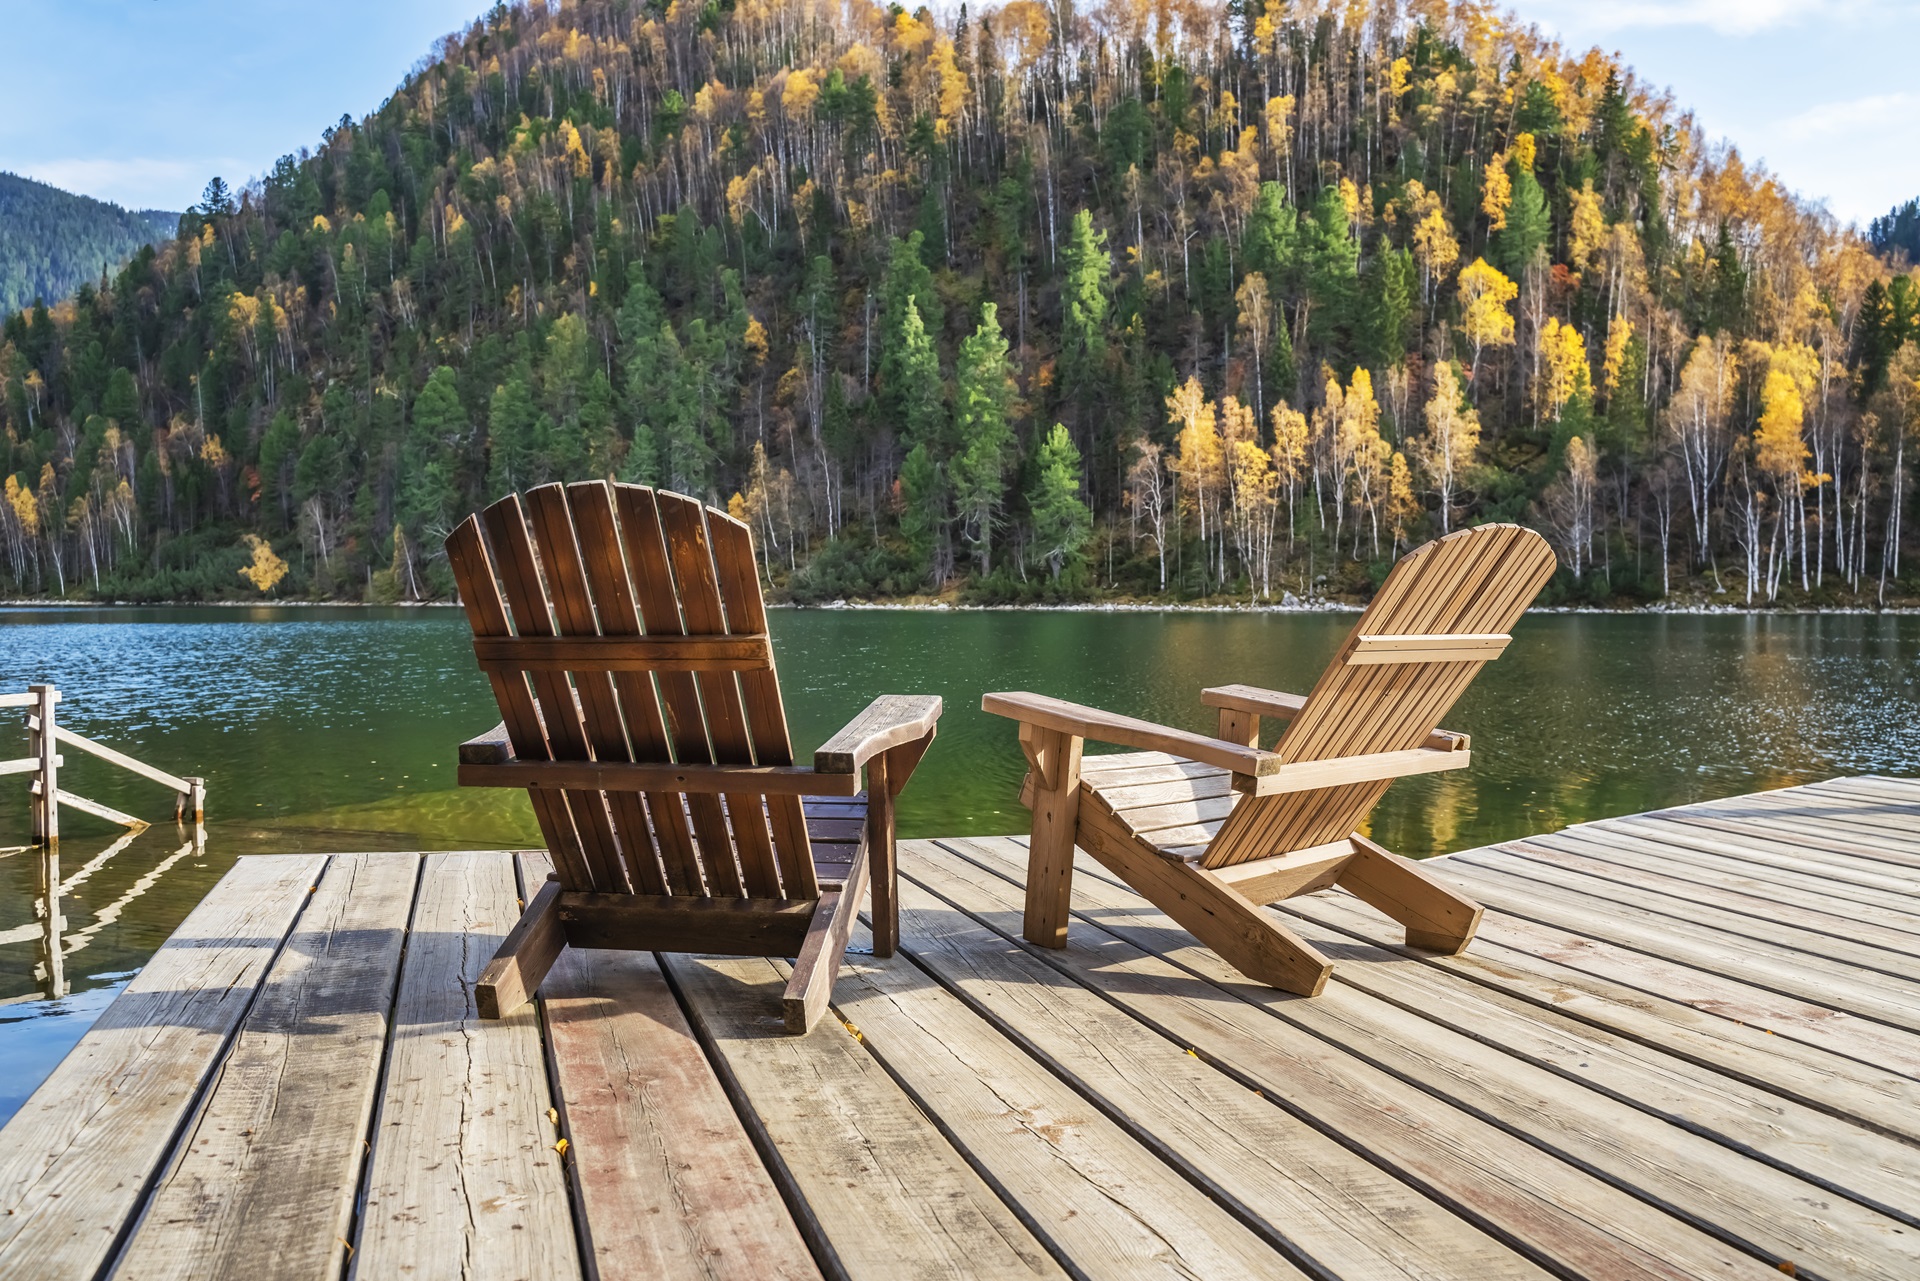 A dock on a lake with two Adirondack chairs facing out on the water, a mountain in the distance with green and yellow trees